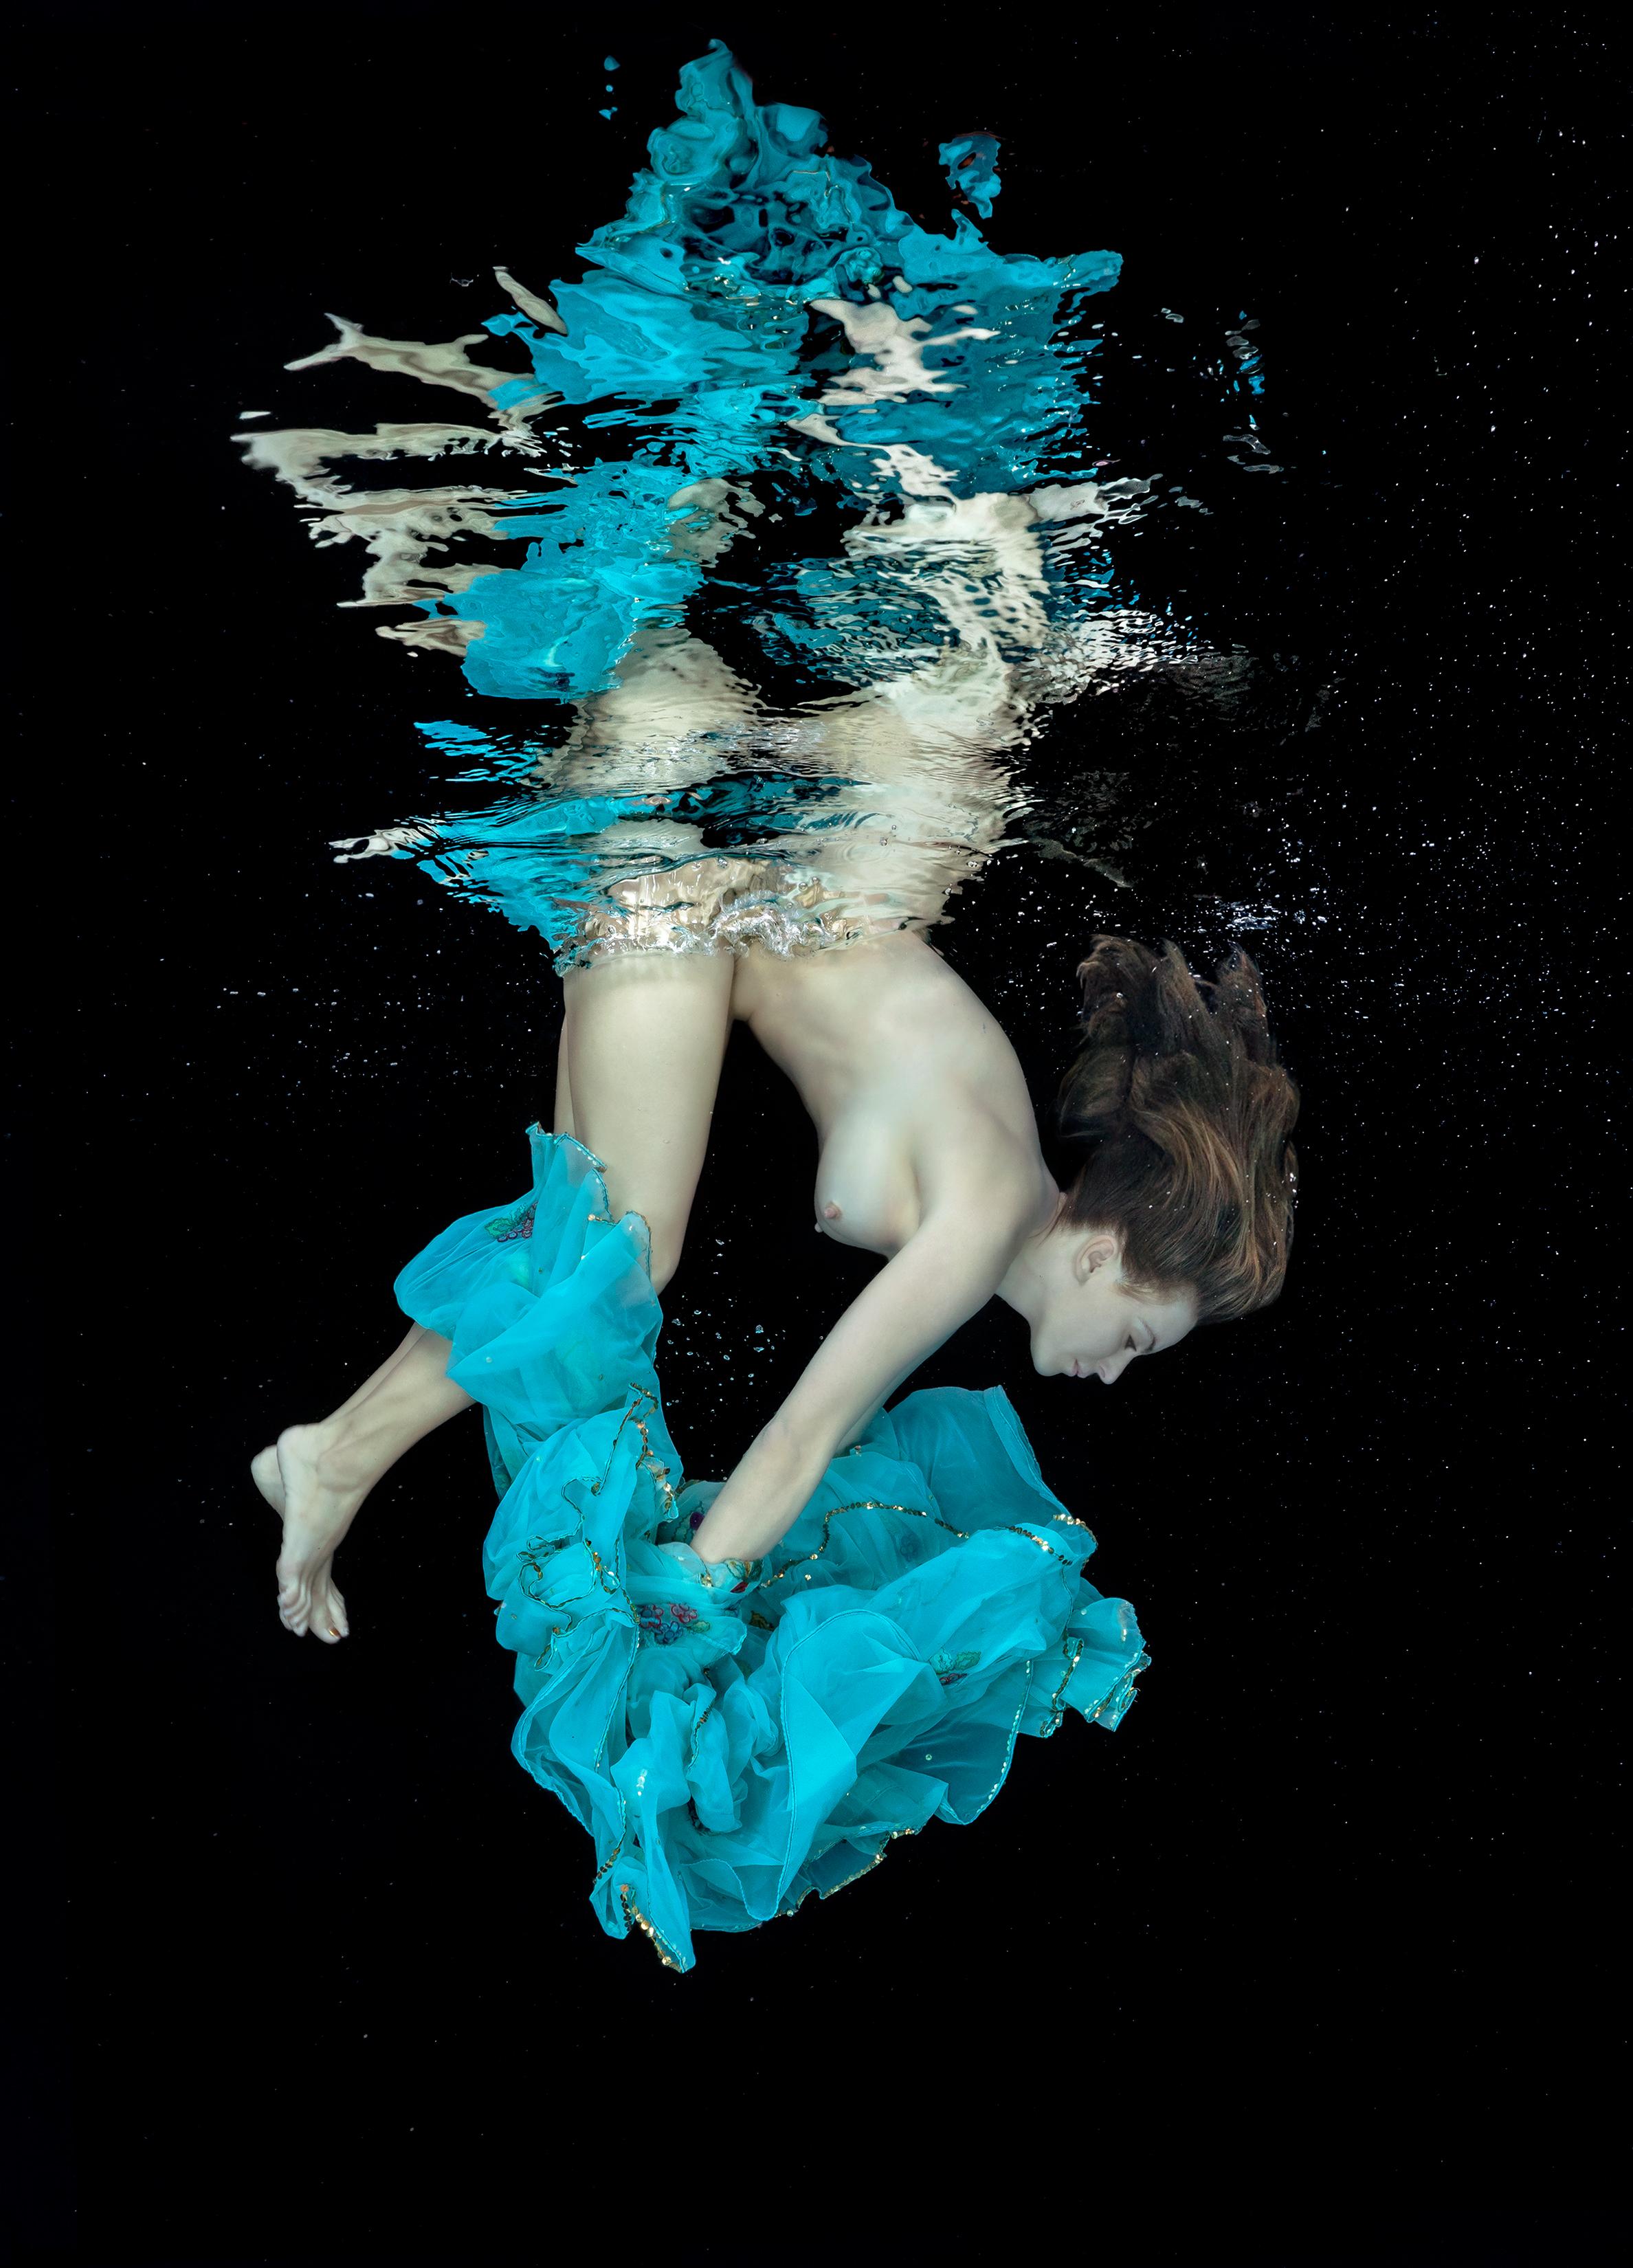 Alex Sher Nude Photograph - Porcelain and Тurquoise - underwater nude photograph - archival pigment 43x60"